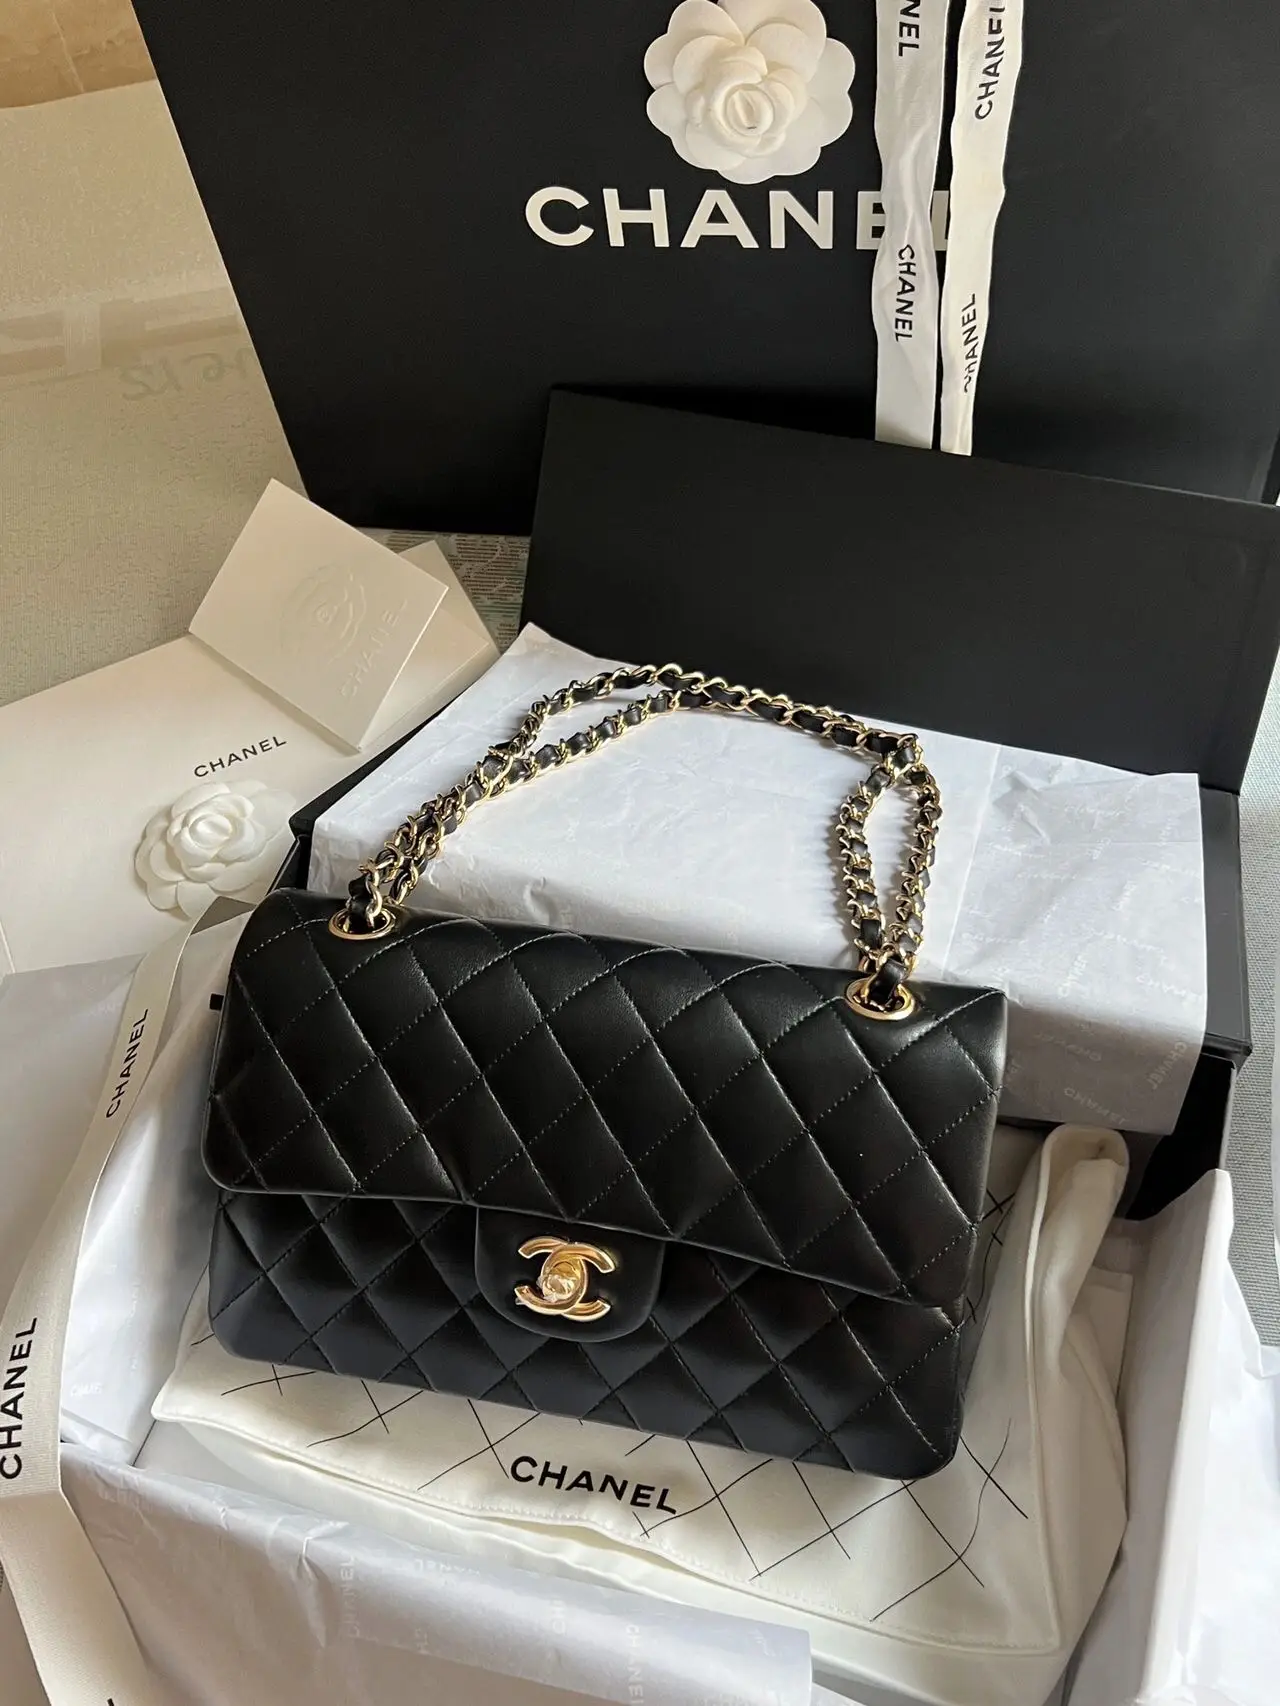 STYLING THE CHANEL 22 BAG A LA INDONESIAN INFLUENCERS - Time International